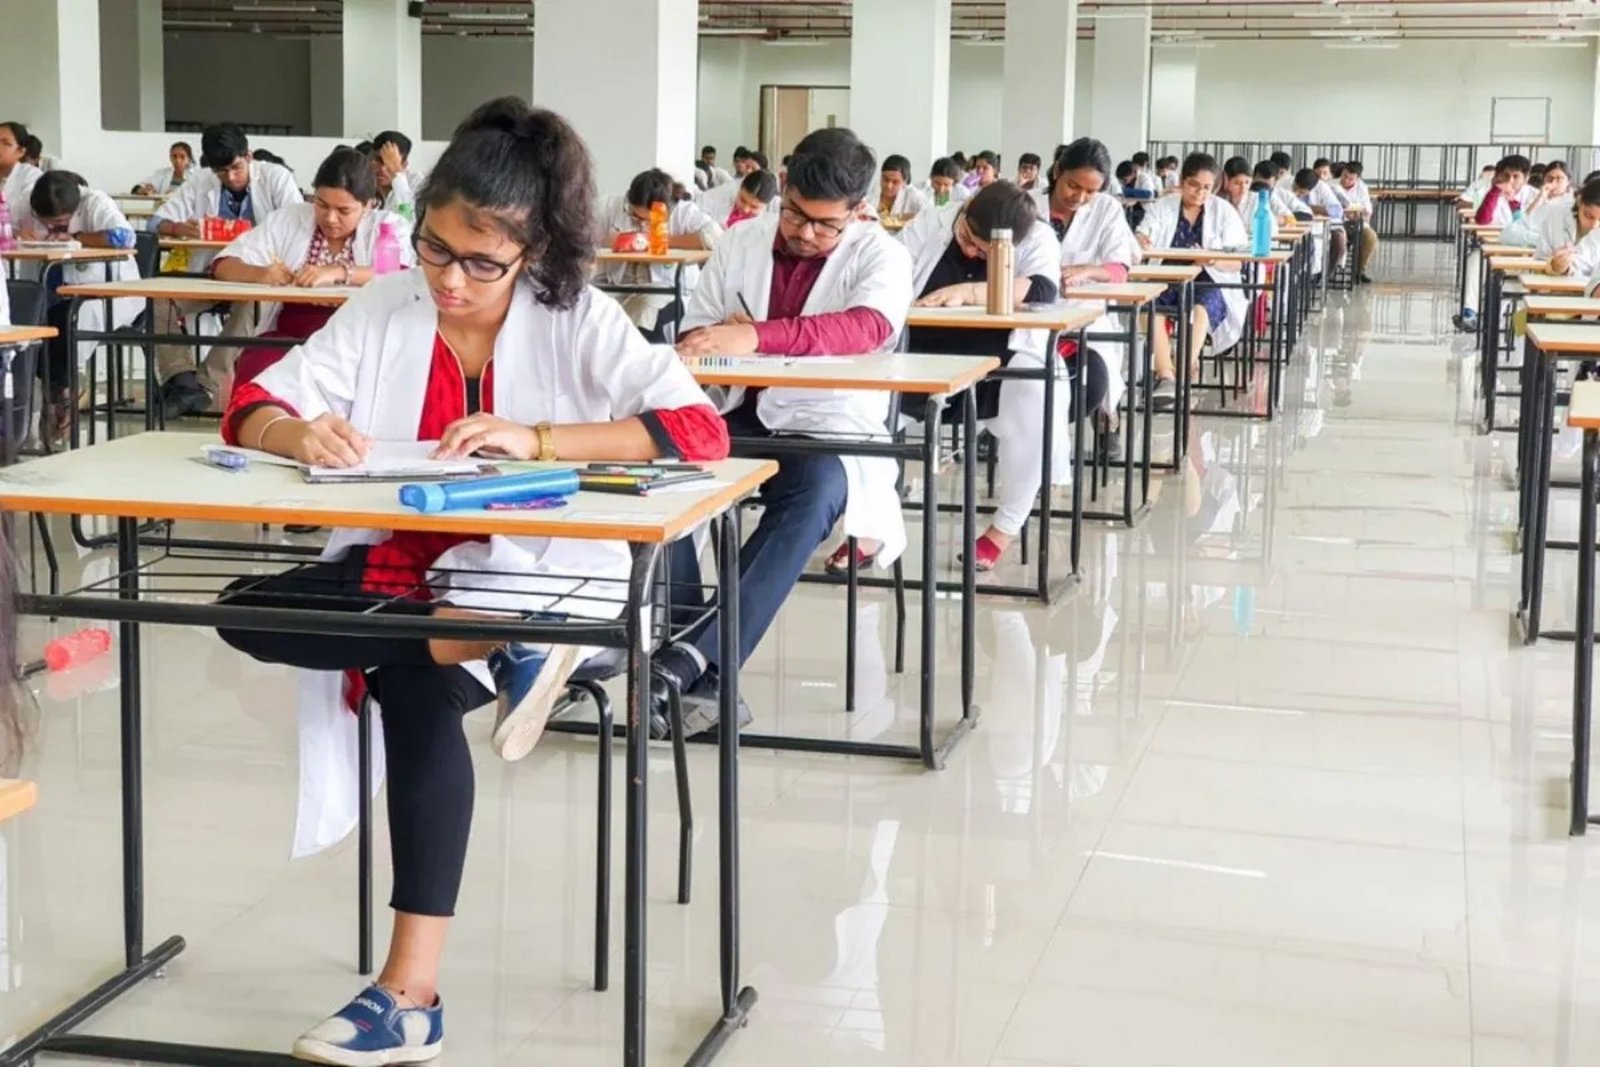 Latest Update On NEET 2021 Exam Date, After JEE Updates